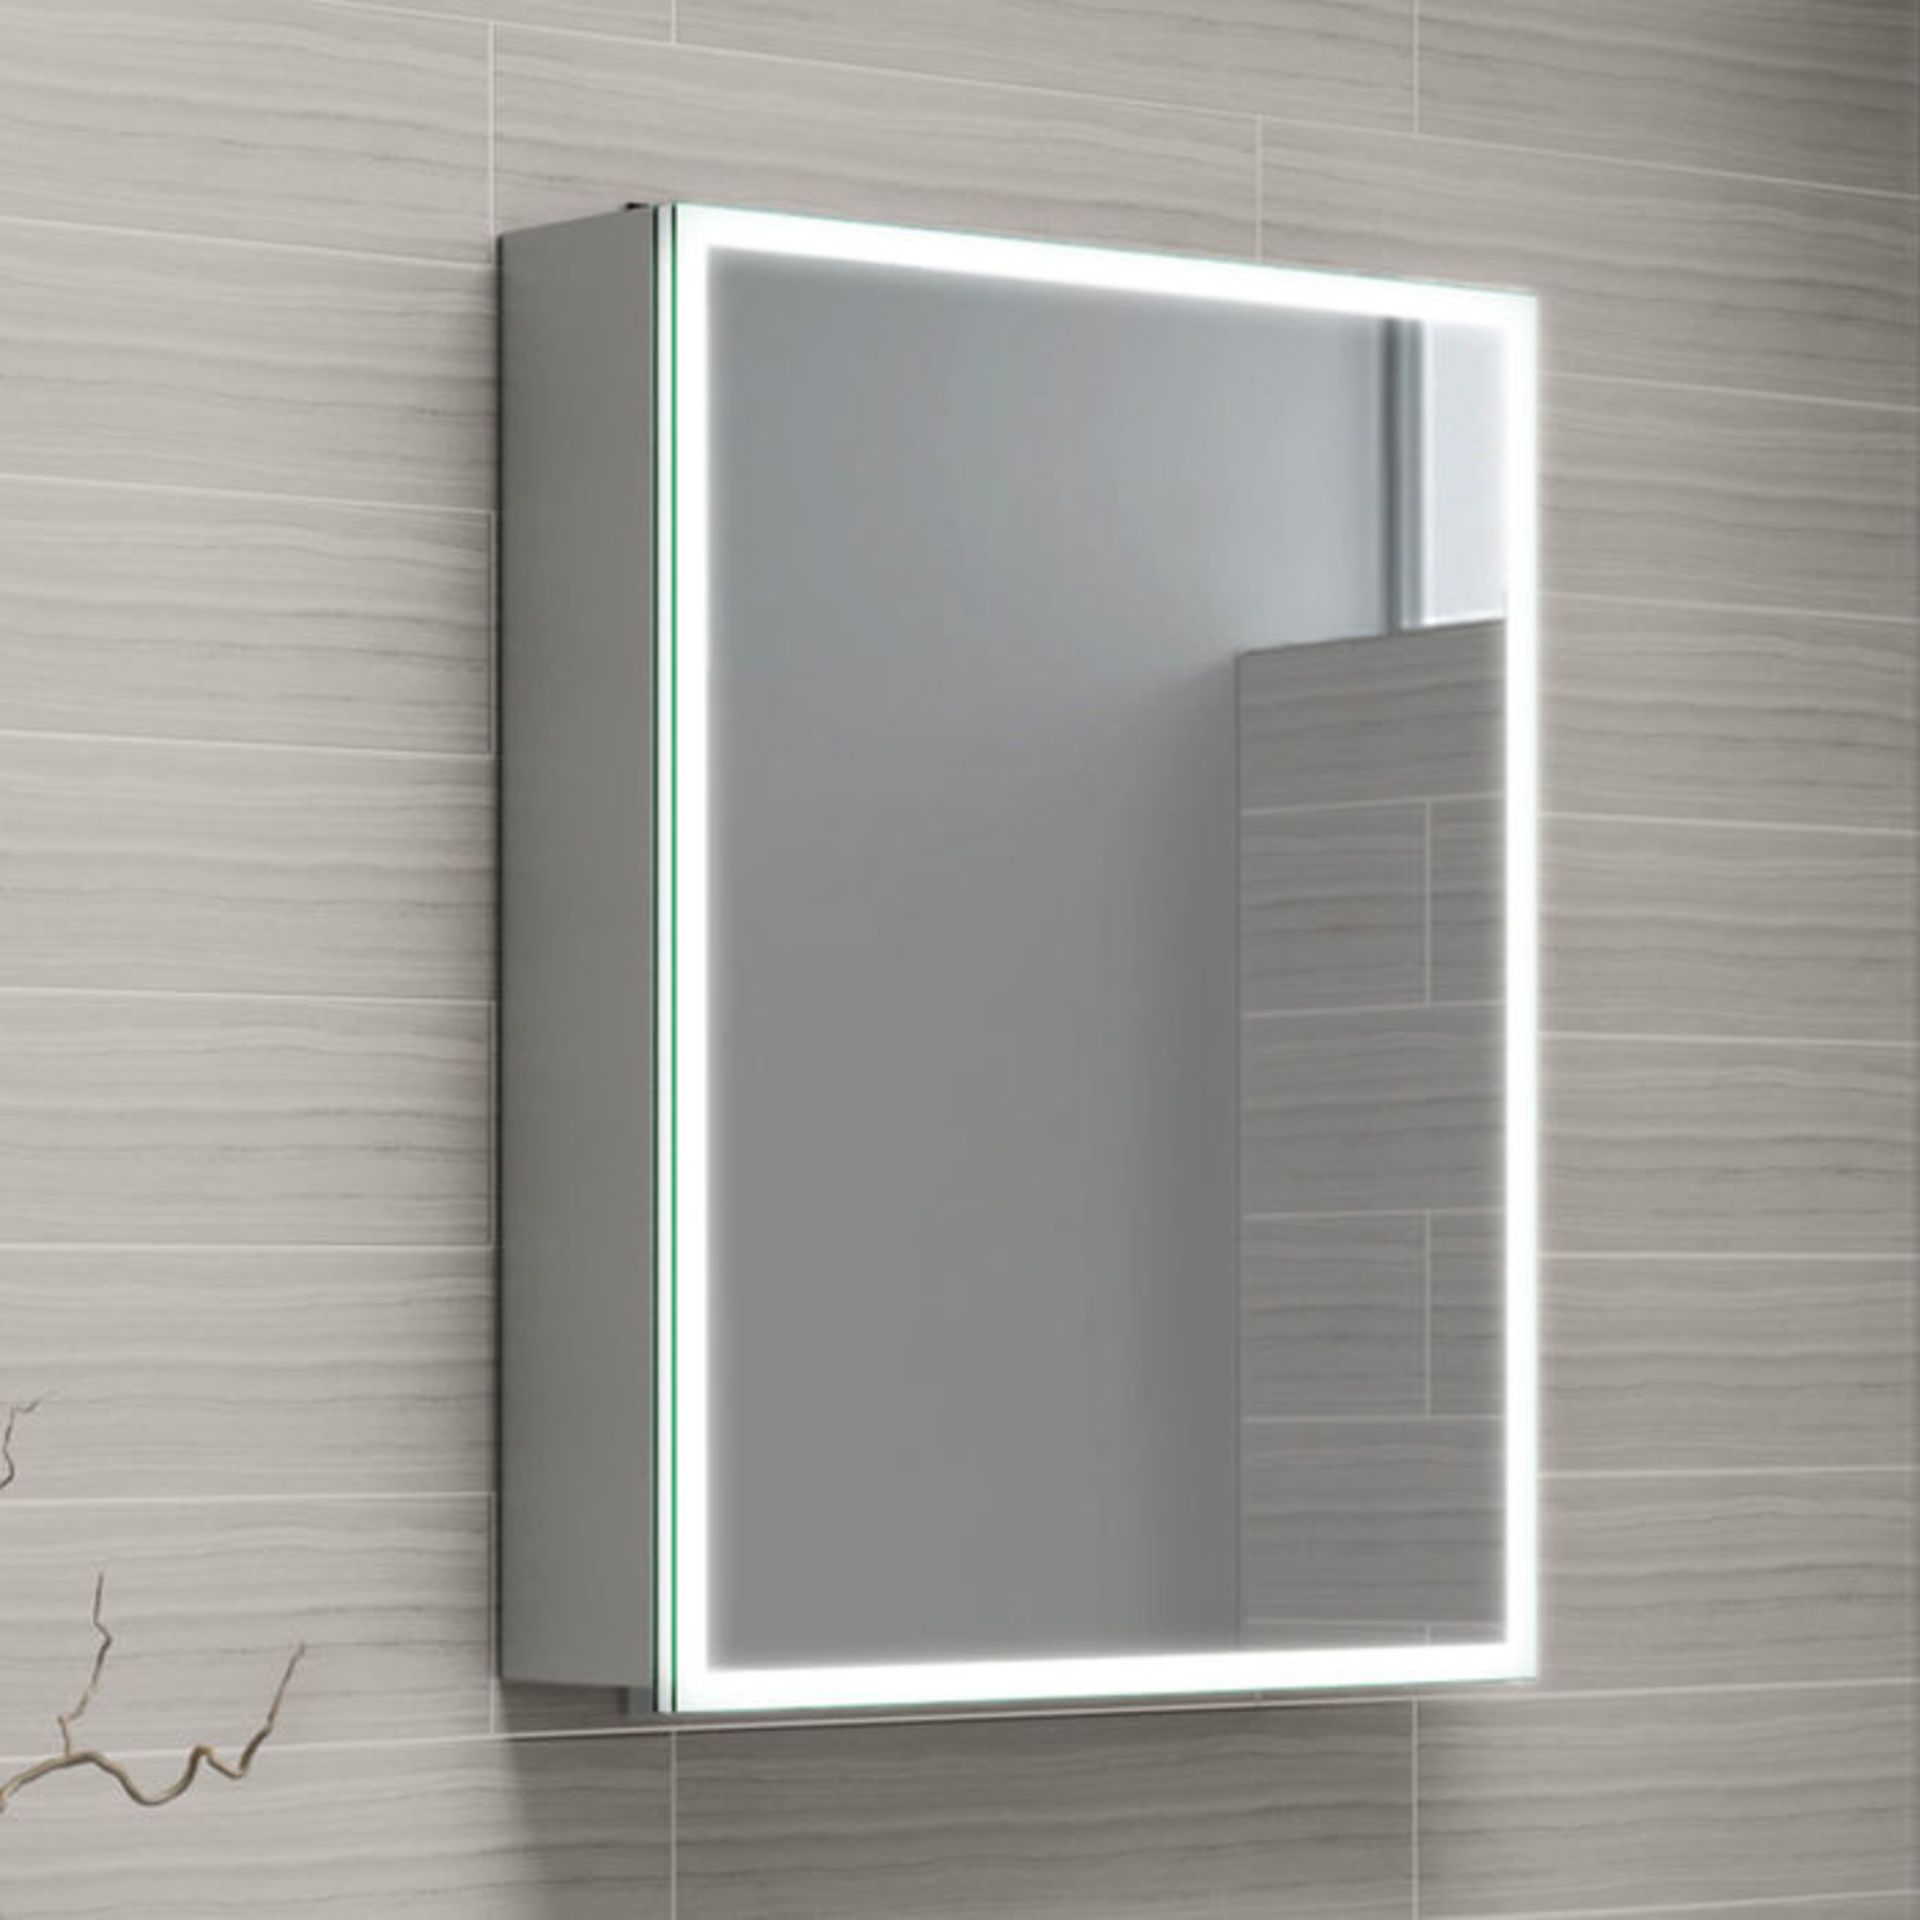 (RC84) 450x600 Cosmic Illuminated LED Mirror Cabinet. RRP £574.99. We love this mirror cabinet... - Image 3 of 3